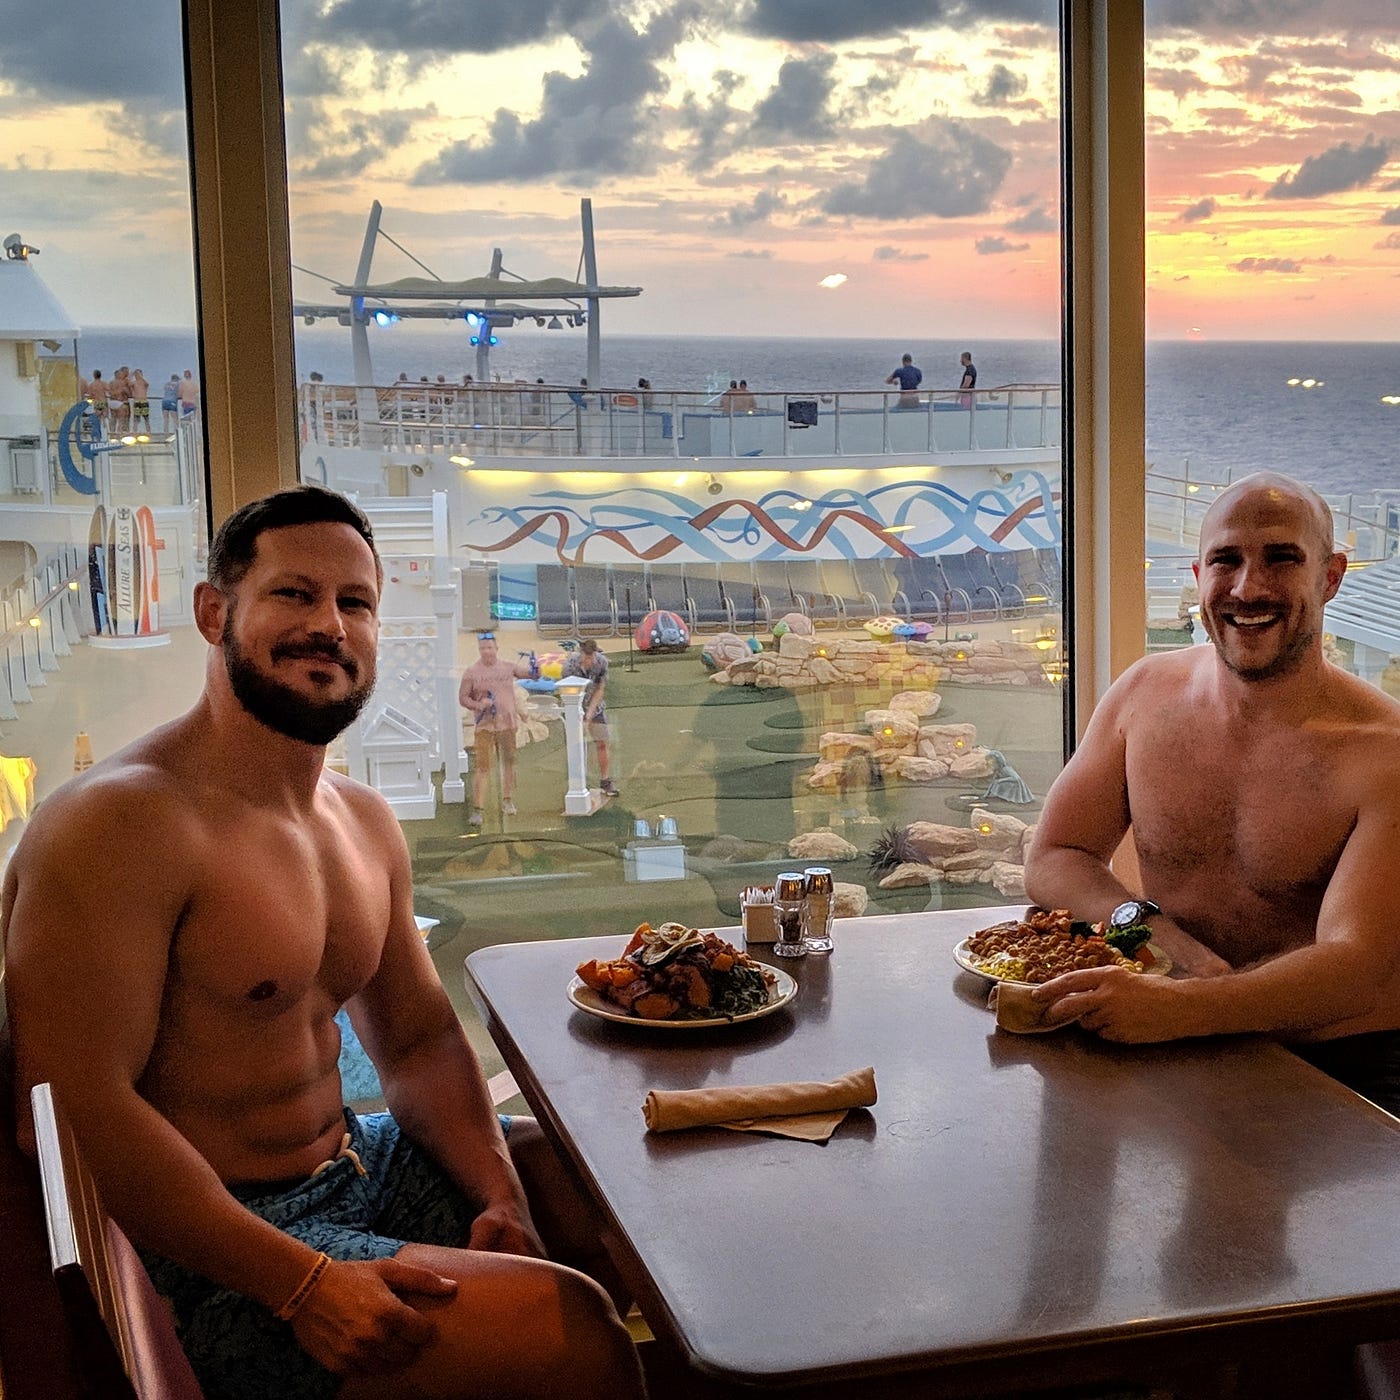 A shy, introverted, morning persons reflections on a gay cruise